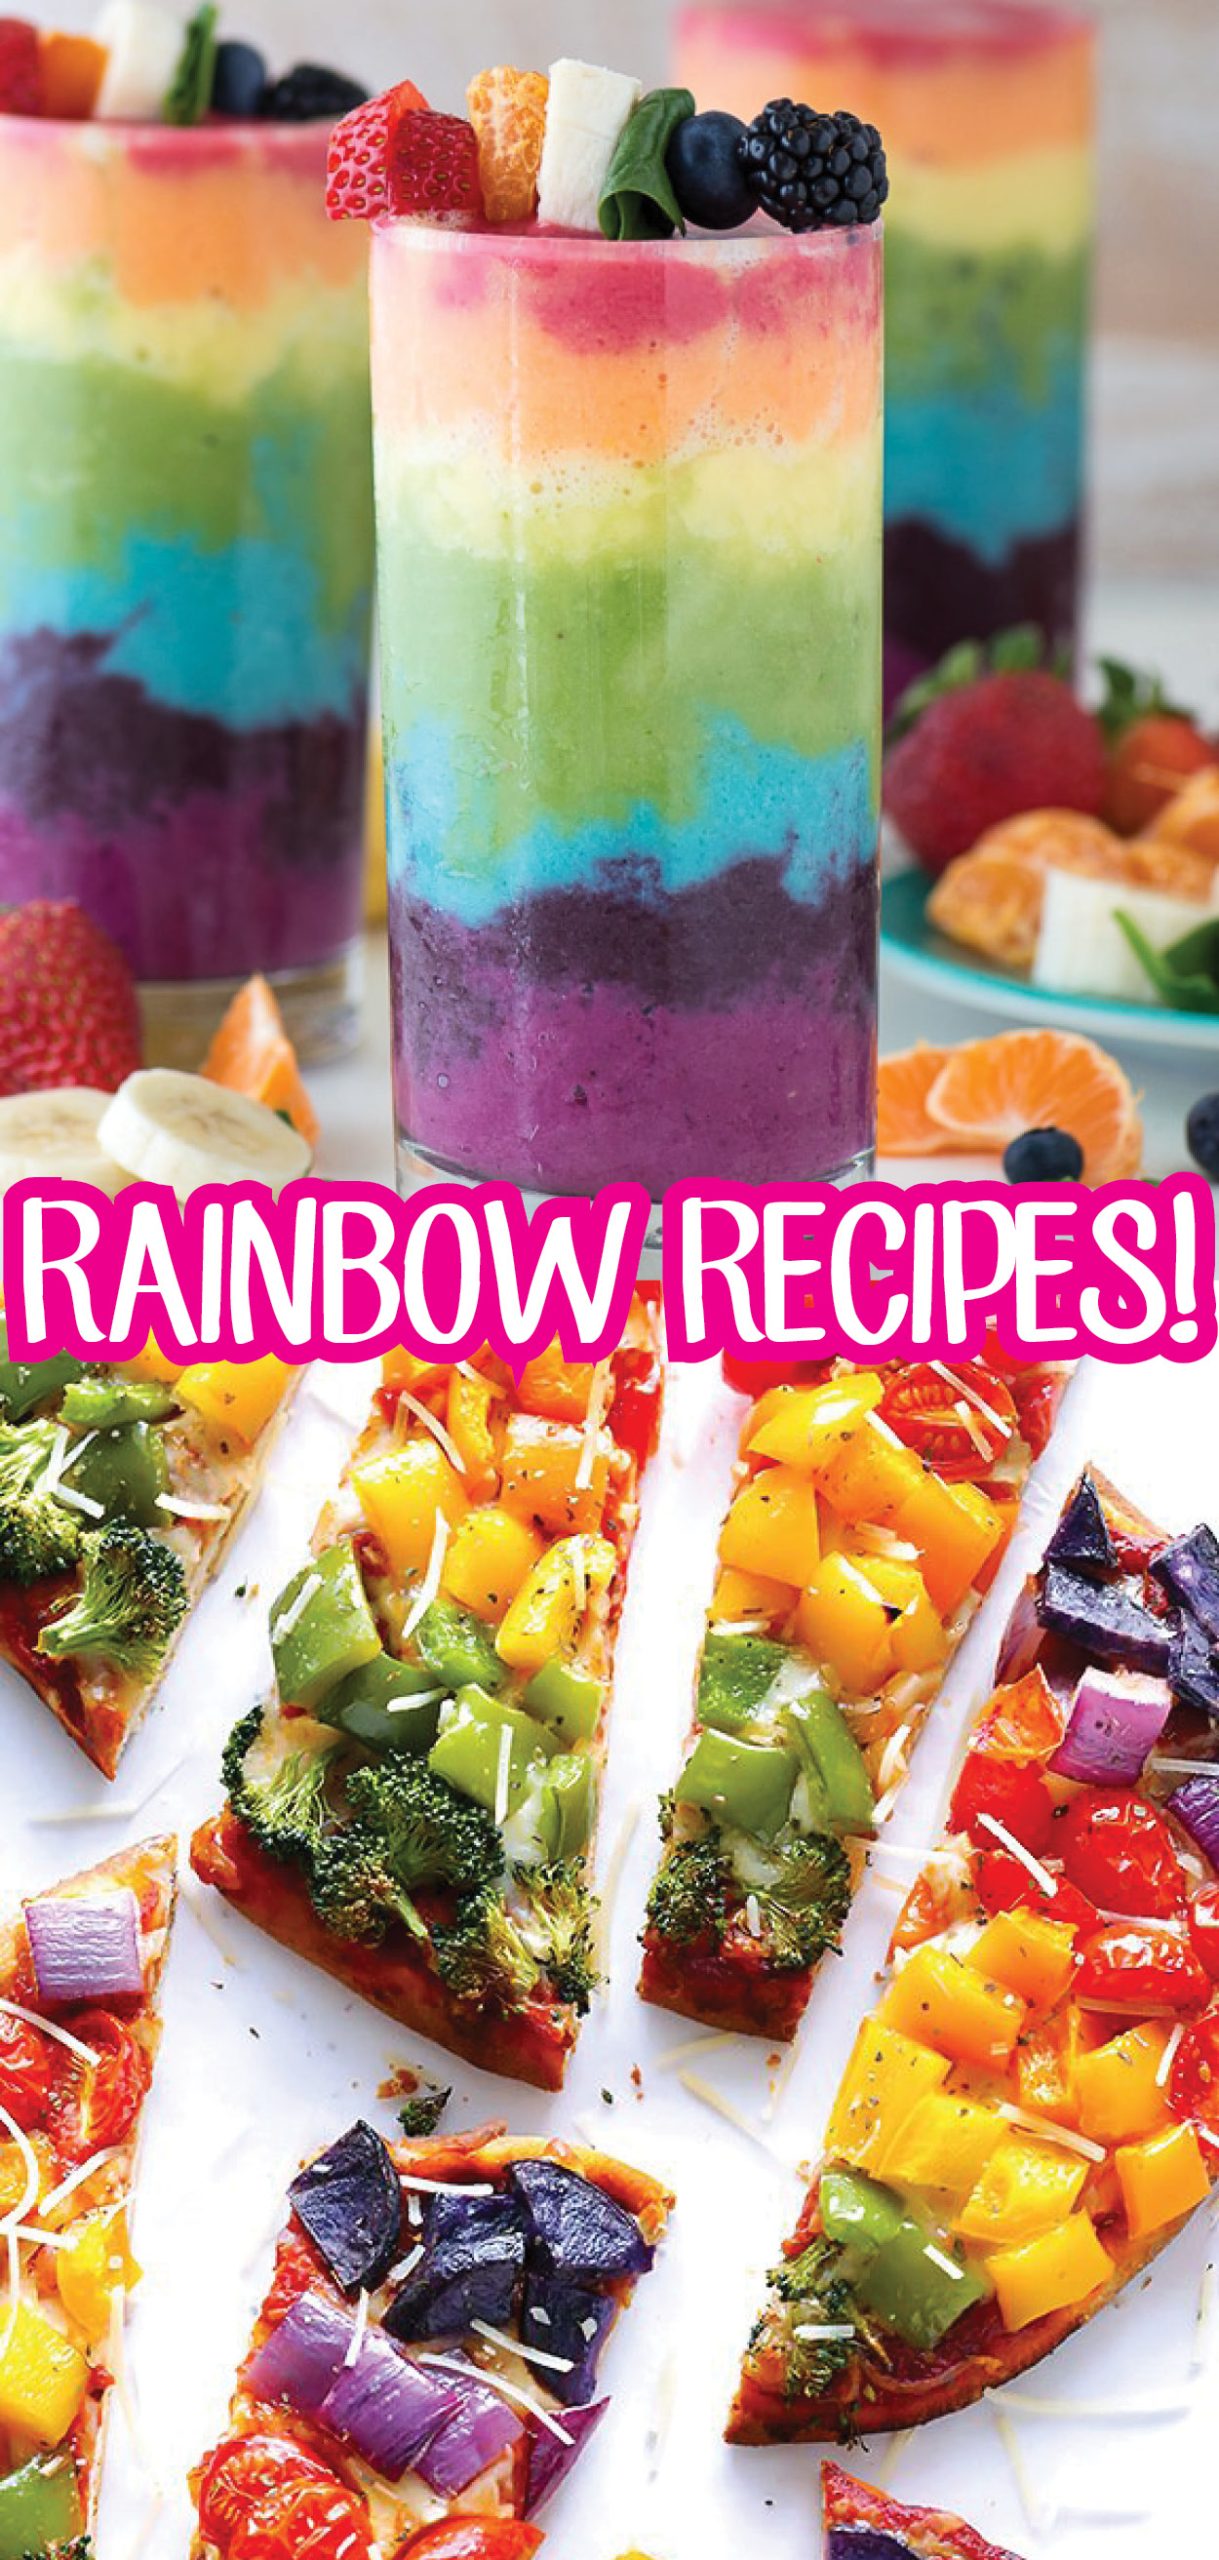 Incredible rainbow ideas that are not only beautiful but delicious too! There is just something super fun about anything extra colorful! From rainbow drinks to rainbow dinners, the colors will add so much excitement to your day!